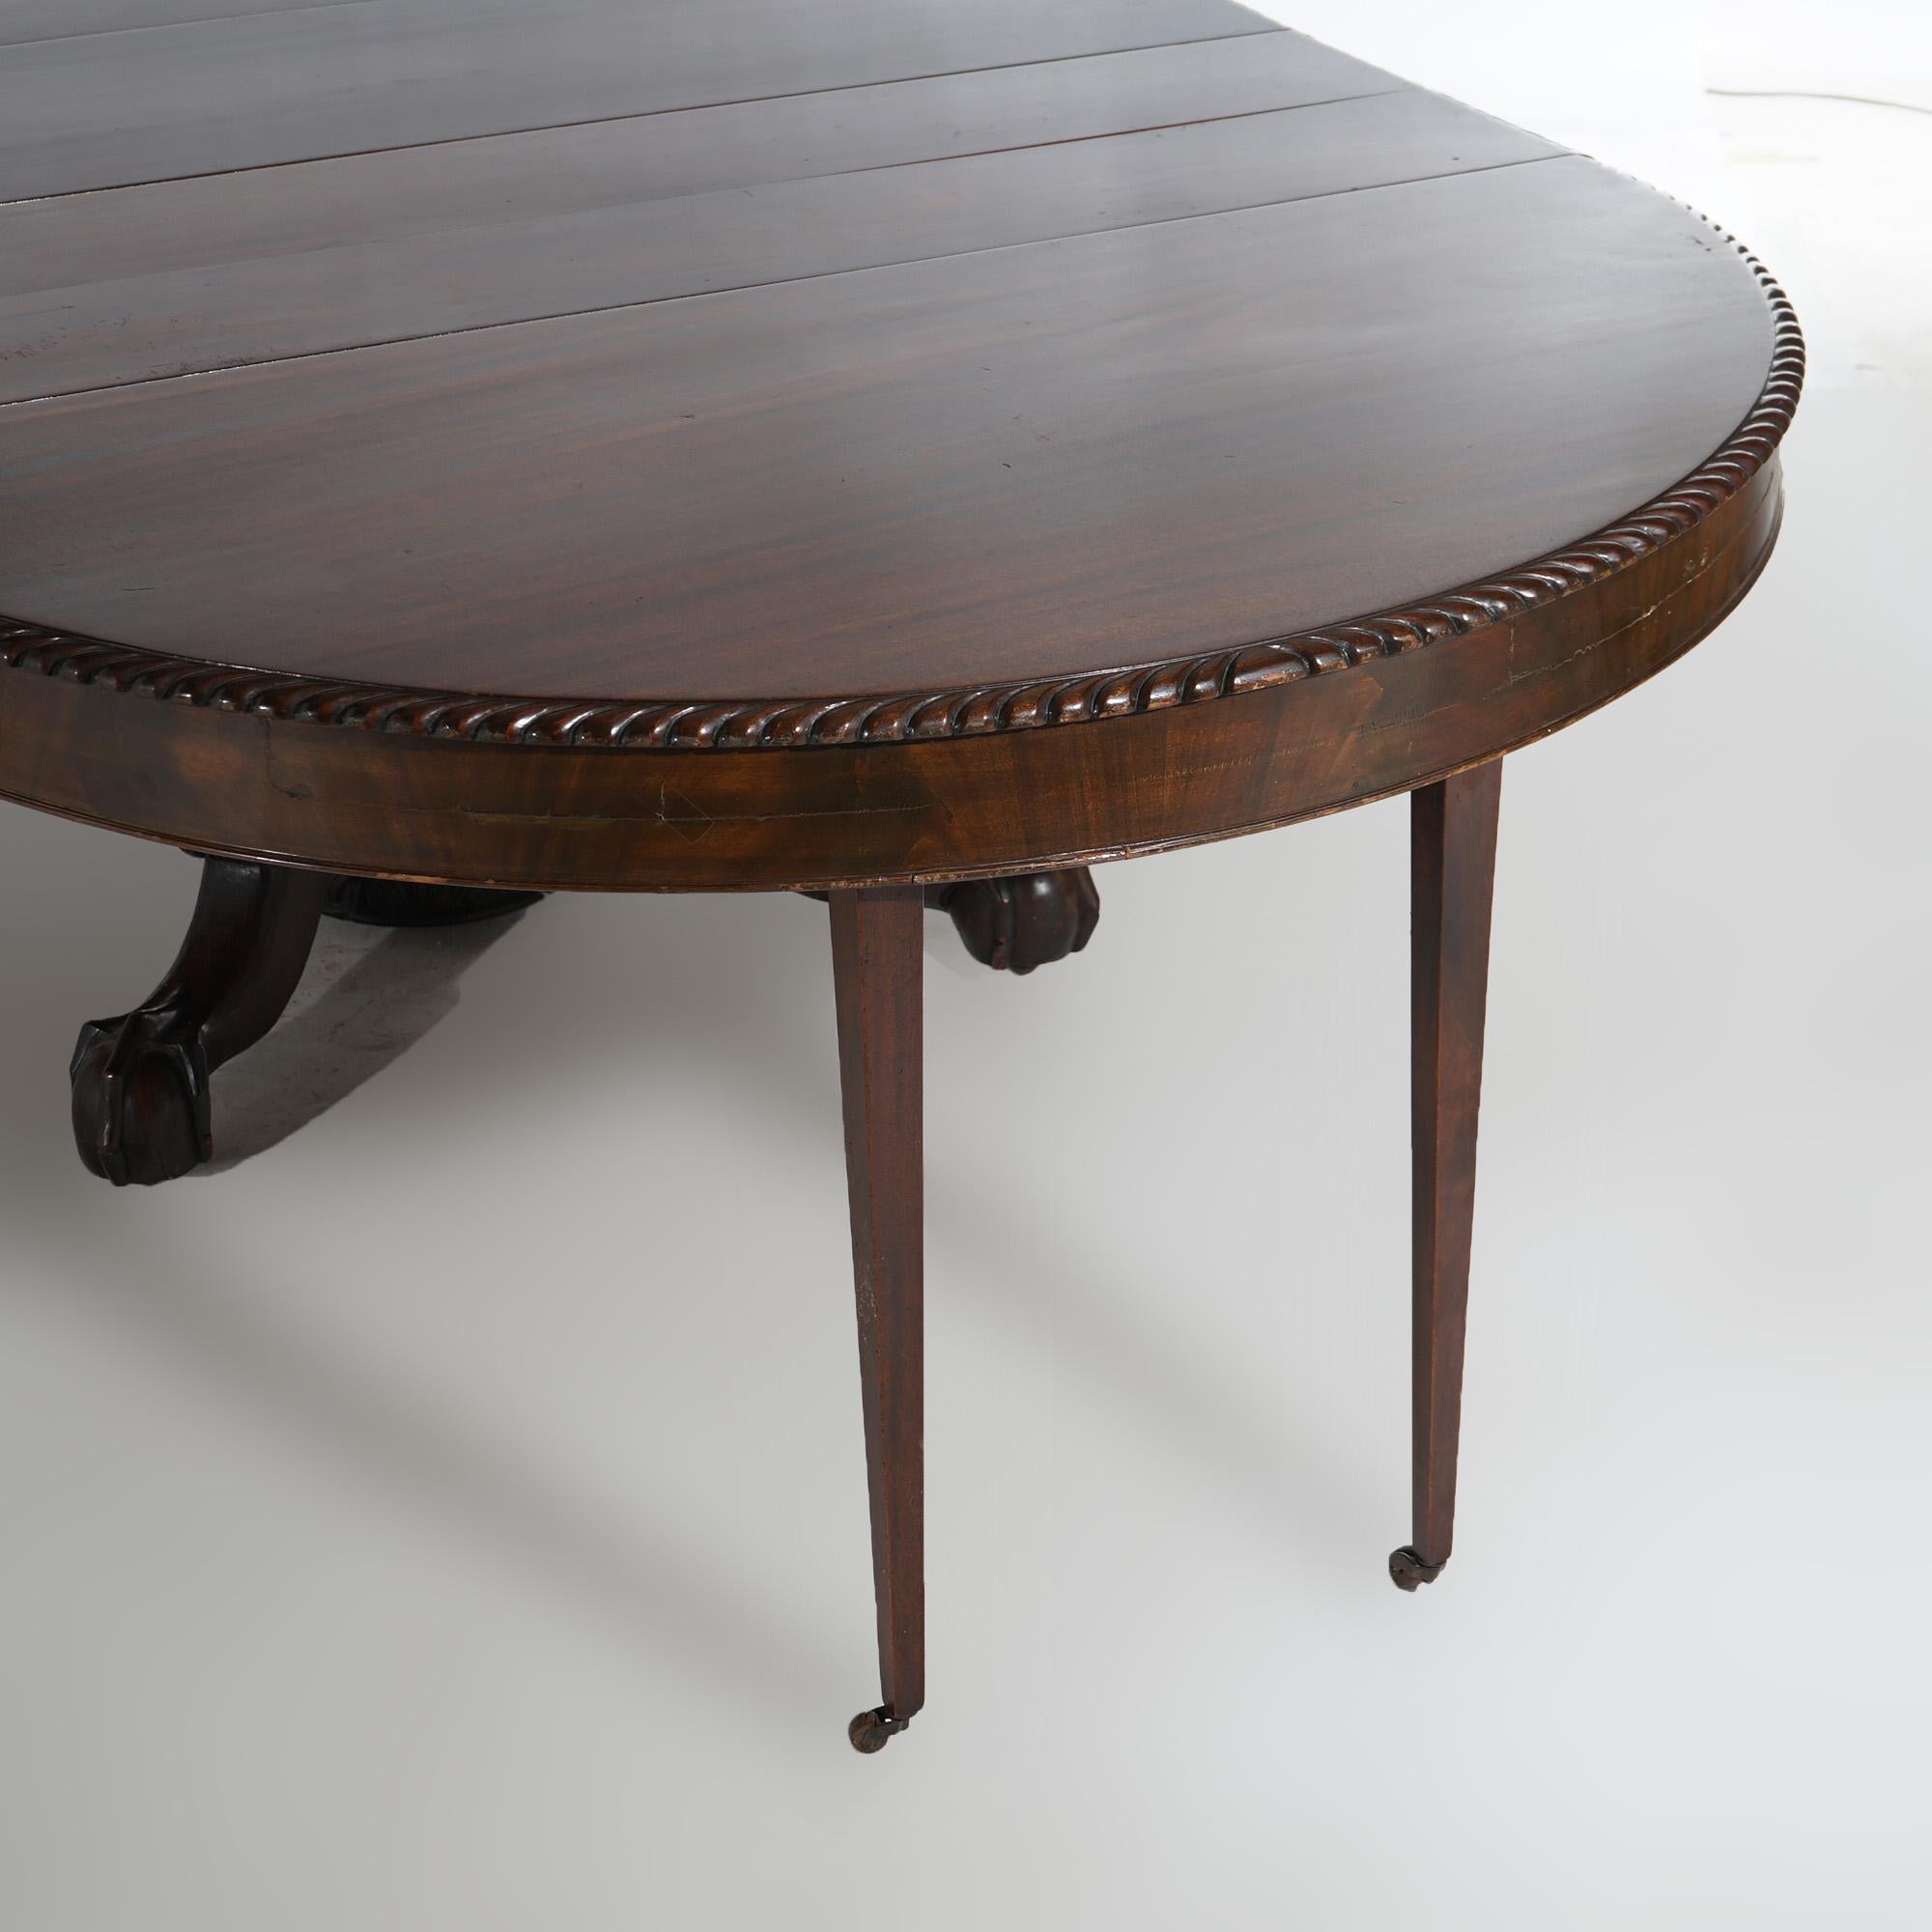 Antique Neoclassical Empire Carved Flame Mahogany 60” Dining Table & Four Leaves For Sale 11